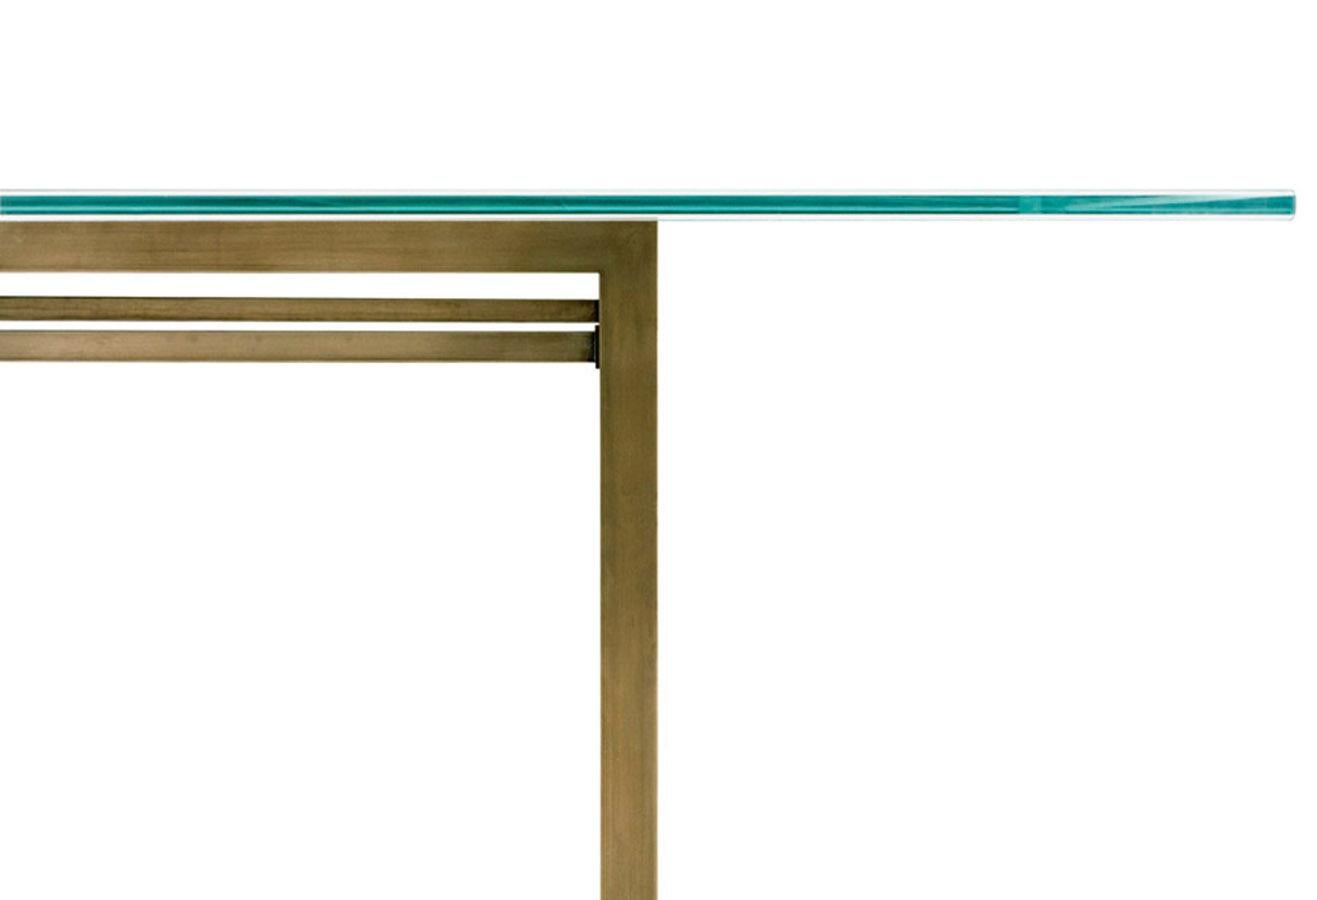 The 90° glass and metal dining table features a frame made of matte brass angles and a rectangular glass top. 

This item is a showroom sample.